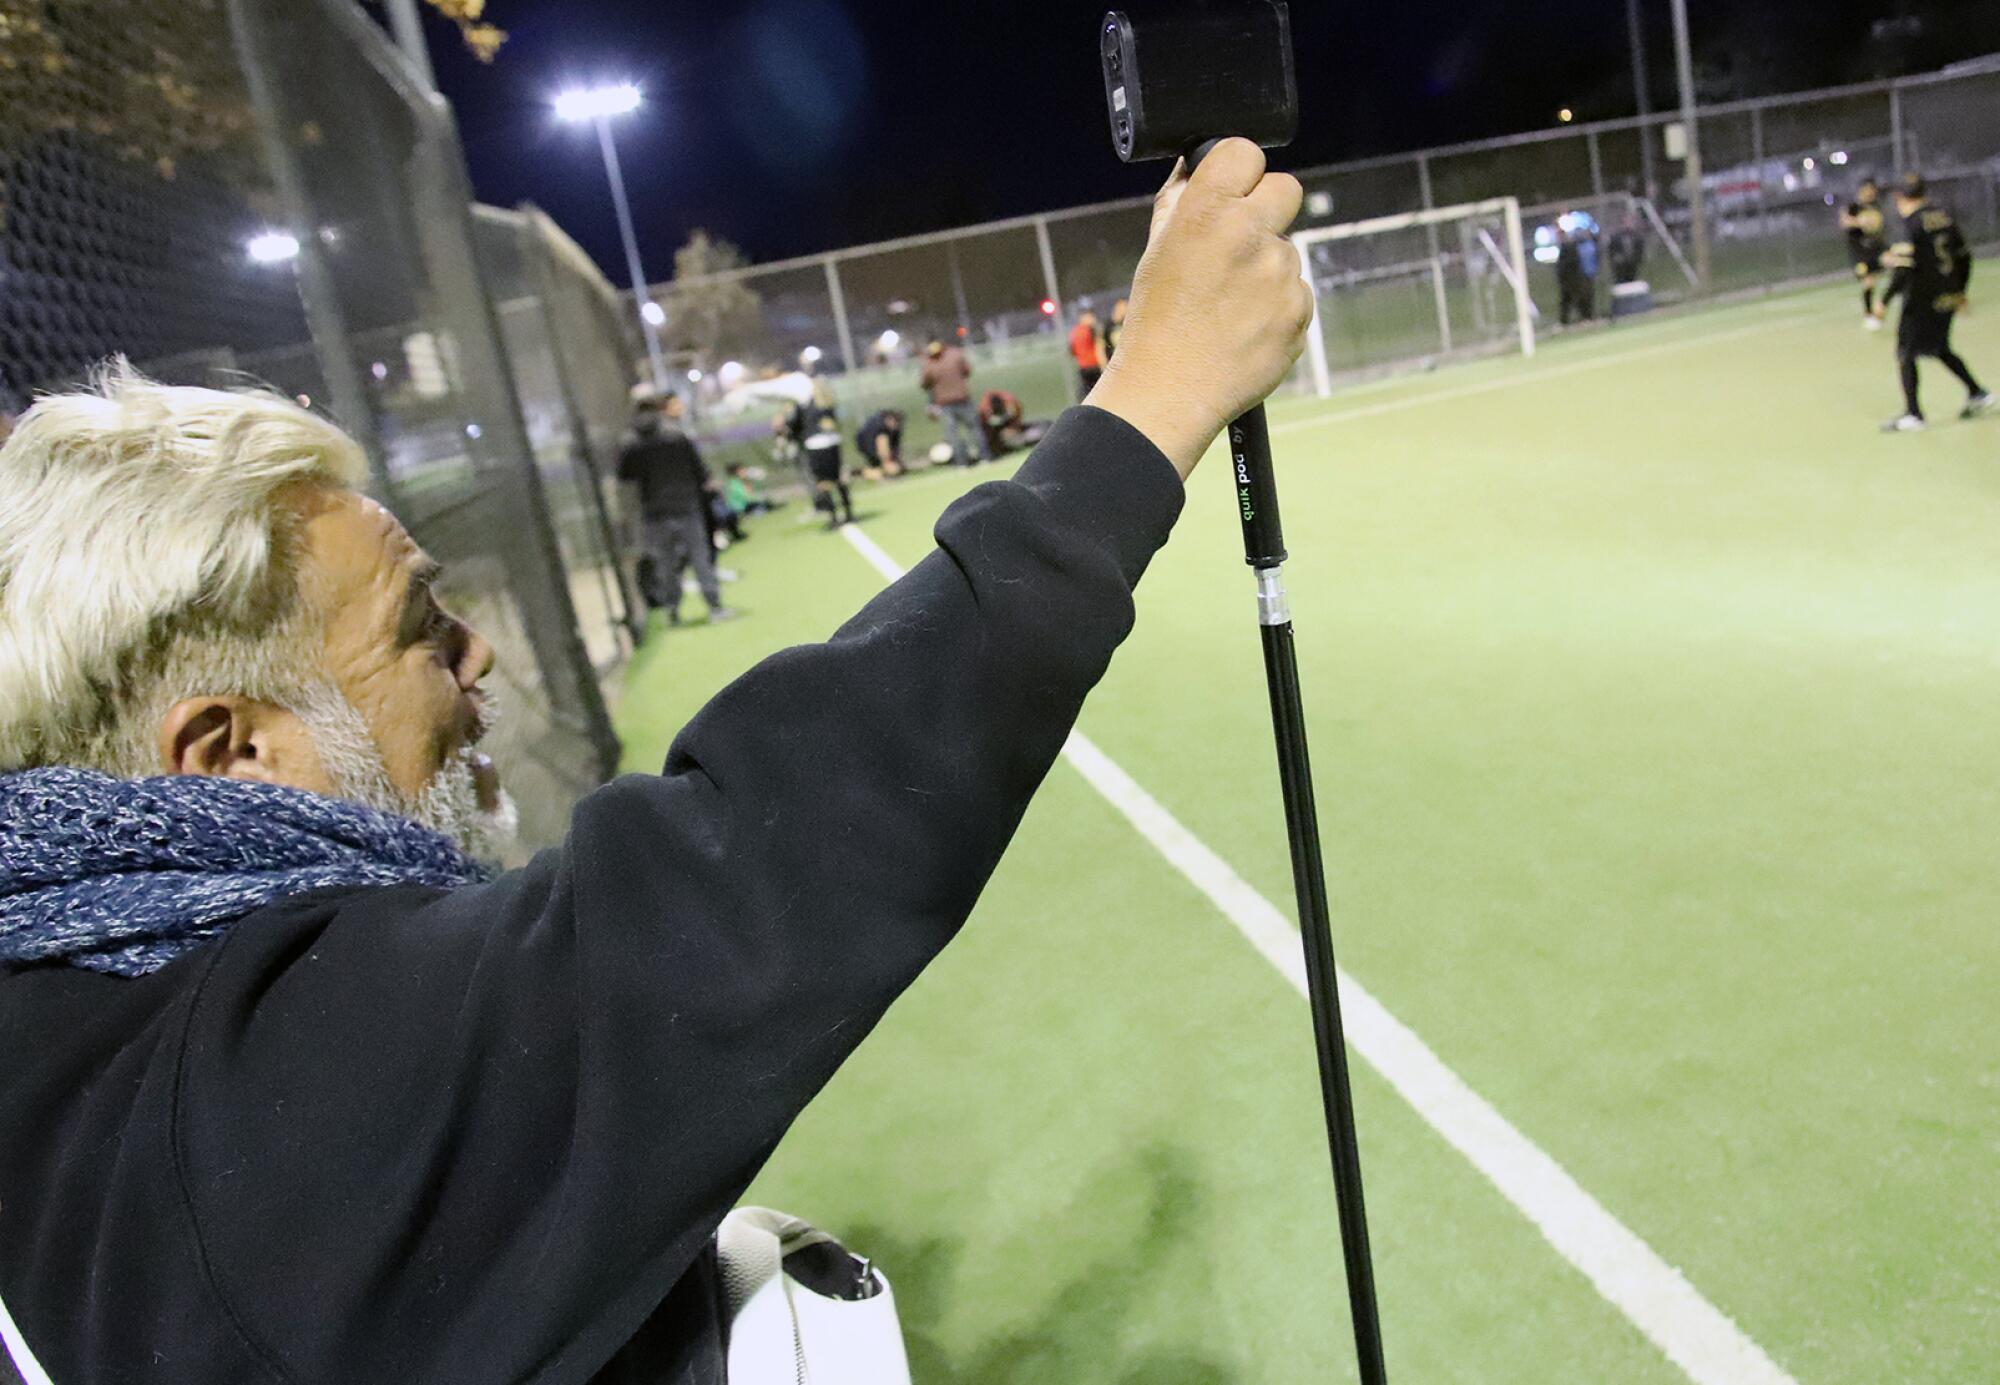 A man holds a tripod on the sideline of a soccer game.